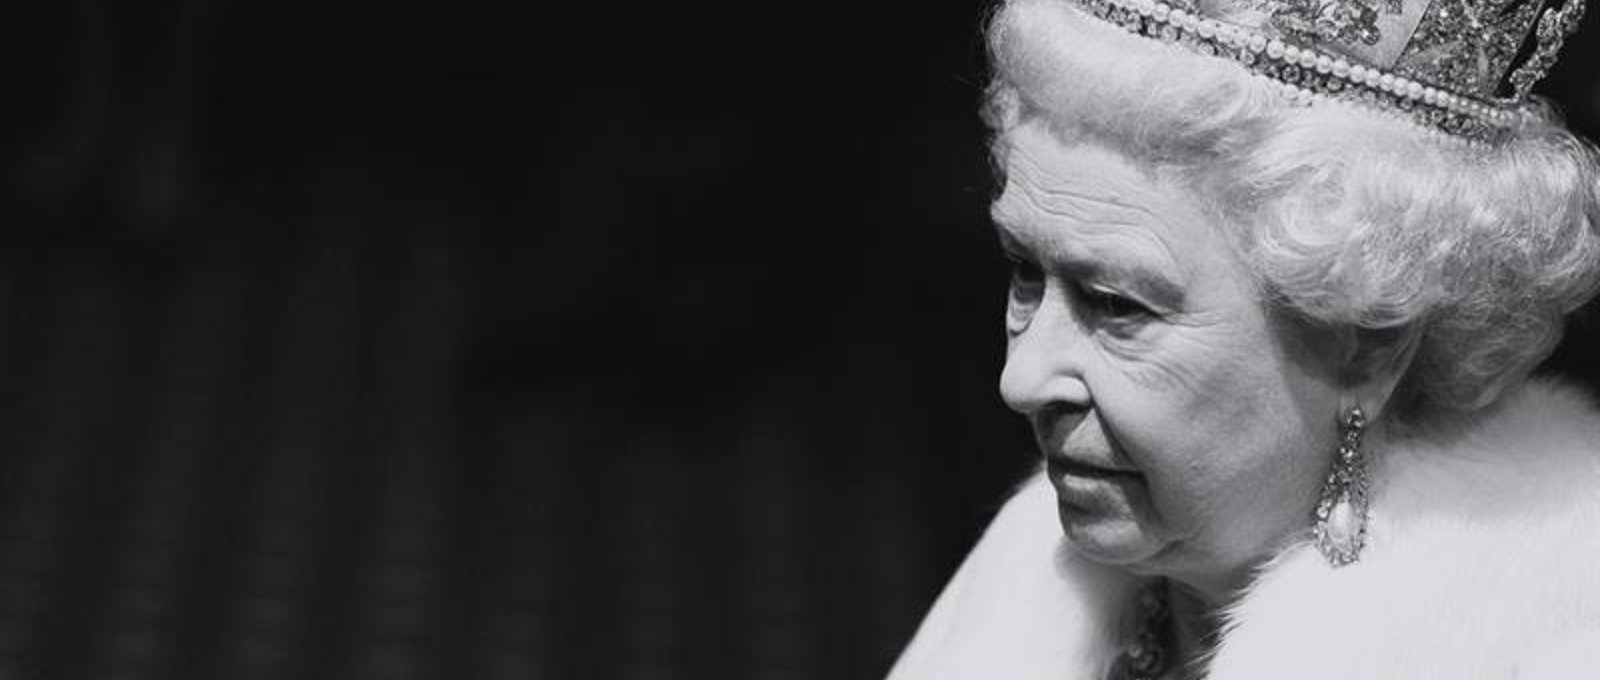 Black and white photograph or HRH The Queen